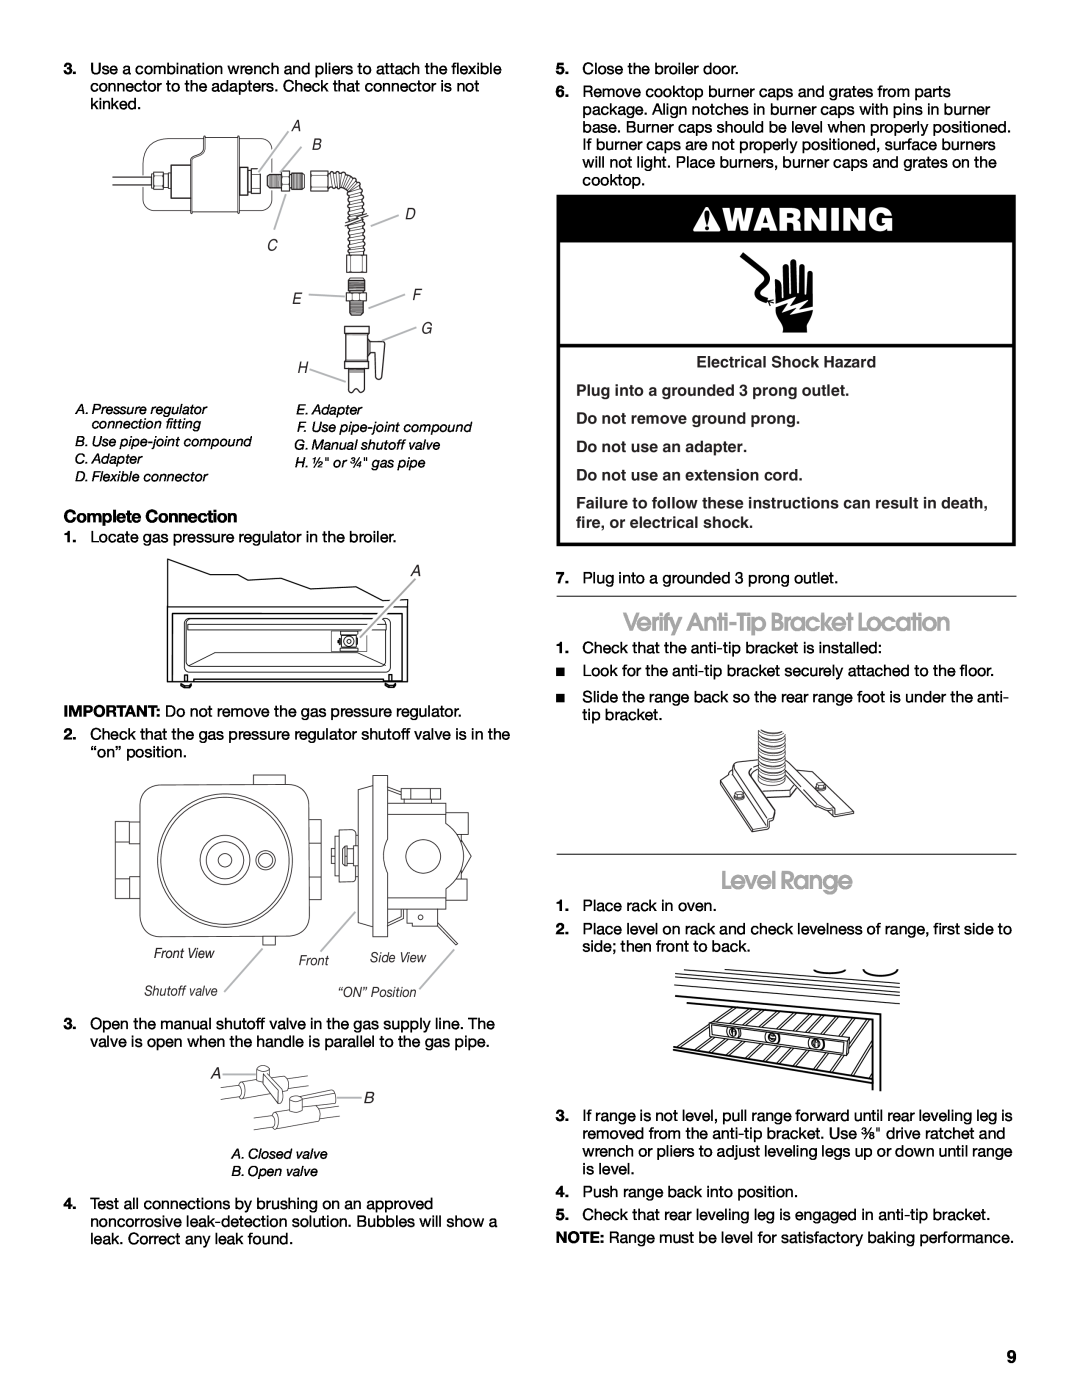 Whirlpool W10032050B Verify Anti-Tip Bracket Location, Level Range, Complete Connection, Do not use an extension cord 